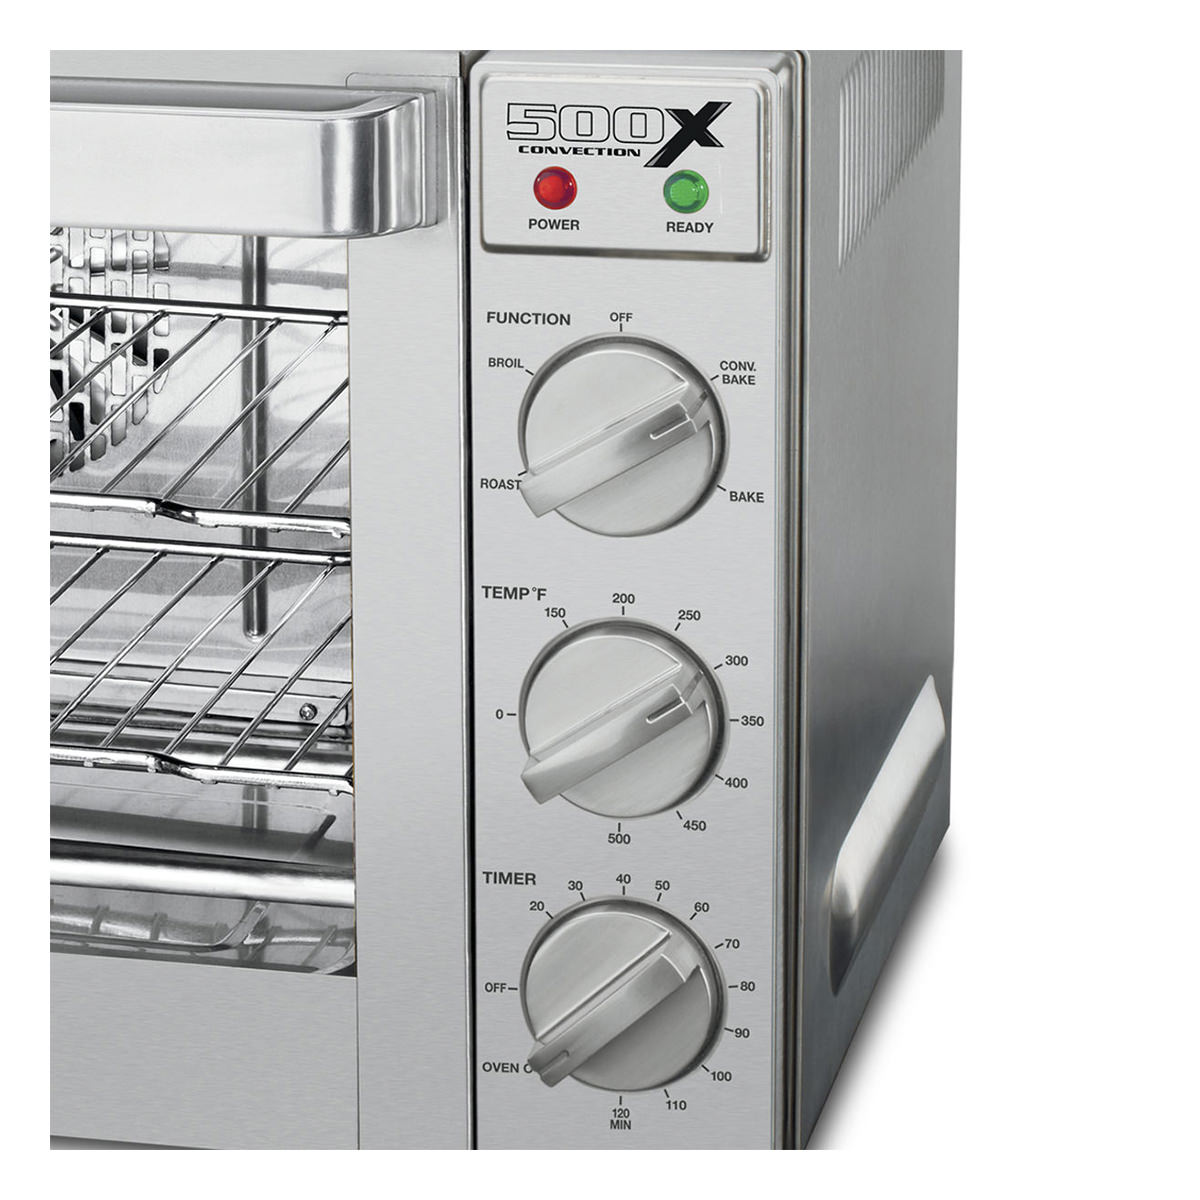 https://www.waringcommercialproducts.com/files/products/wco500x-waring-convection-oven-inset3.jpg